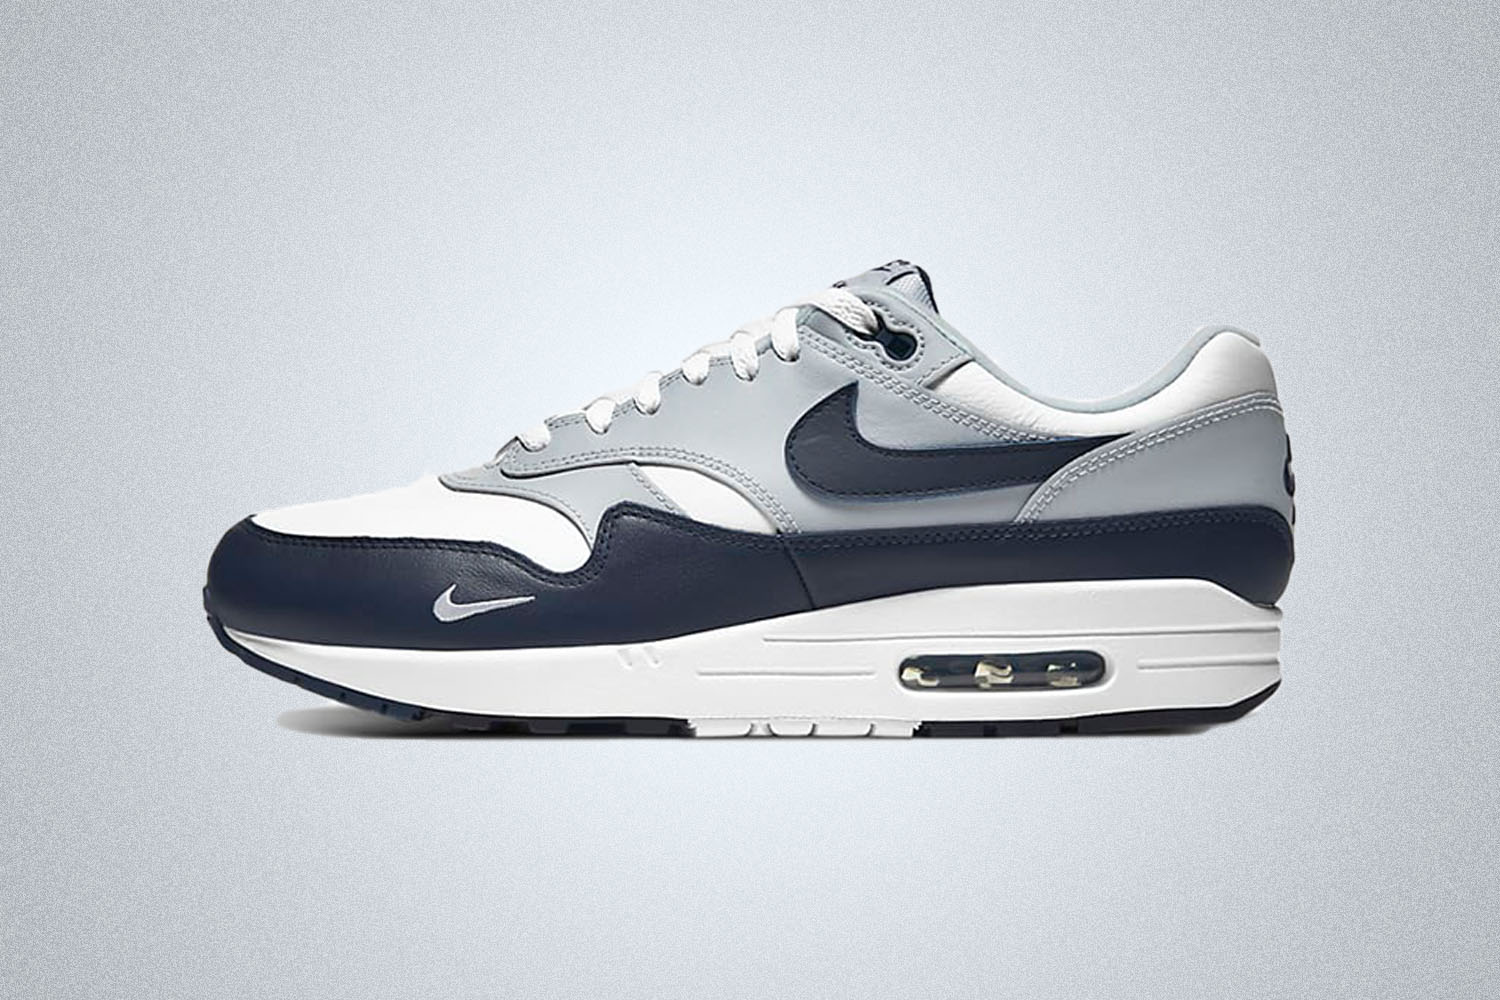 what are air max shoes good for